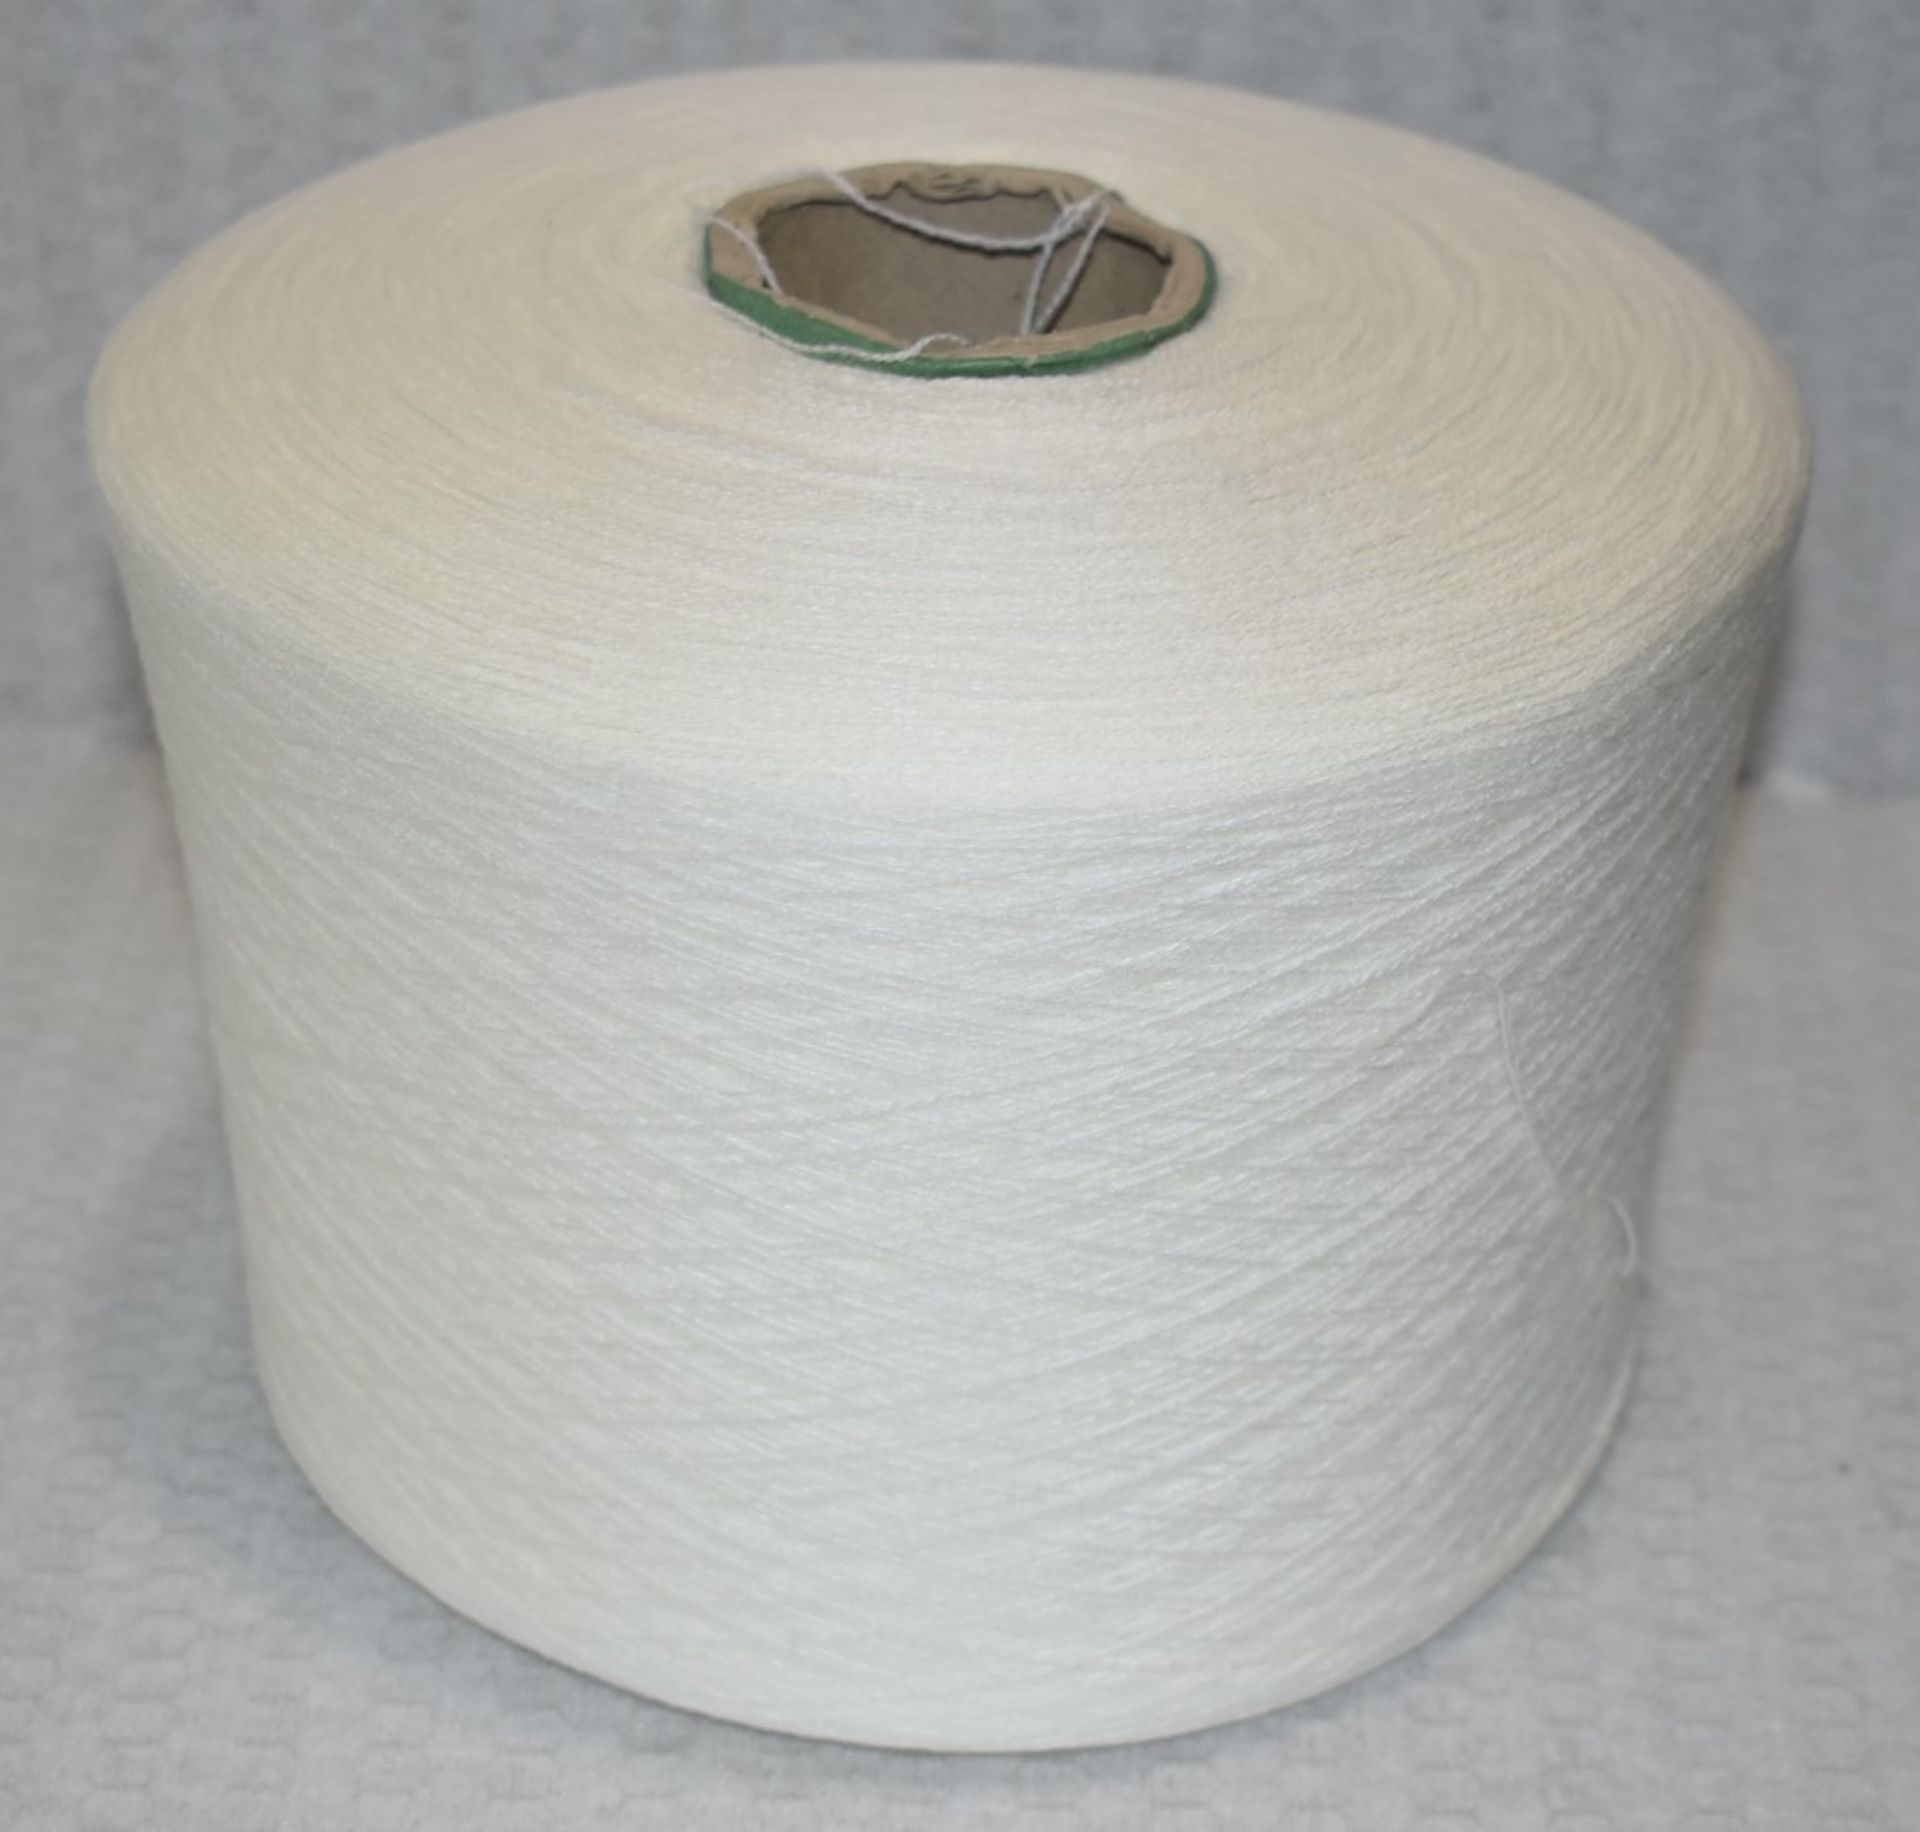 6 x Cones of 28/2 H.B 100% Acrylic Knitting Yarn - Colour: Ivory - Approx Weight: 1,300g - New Stock - Image 6 of 10